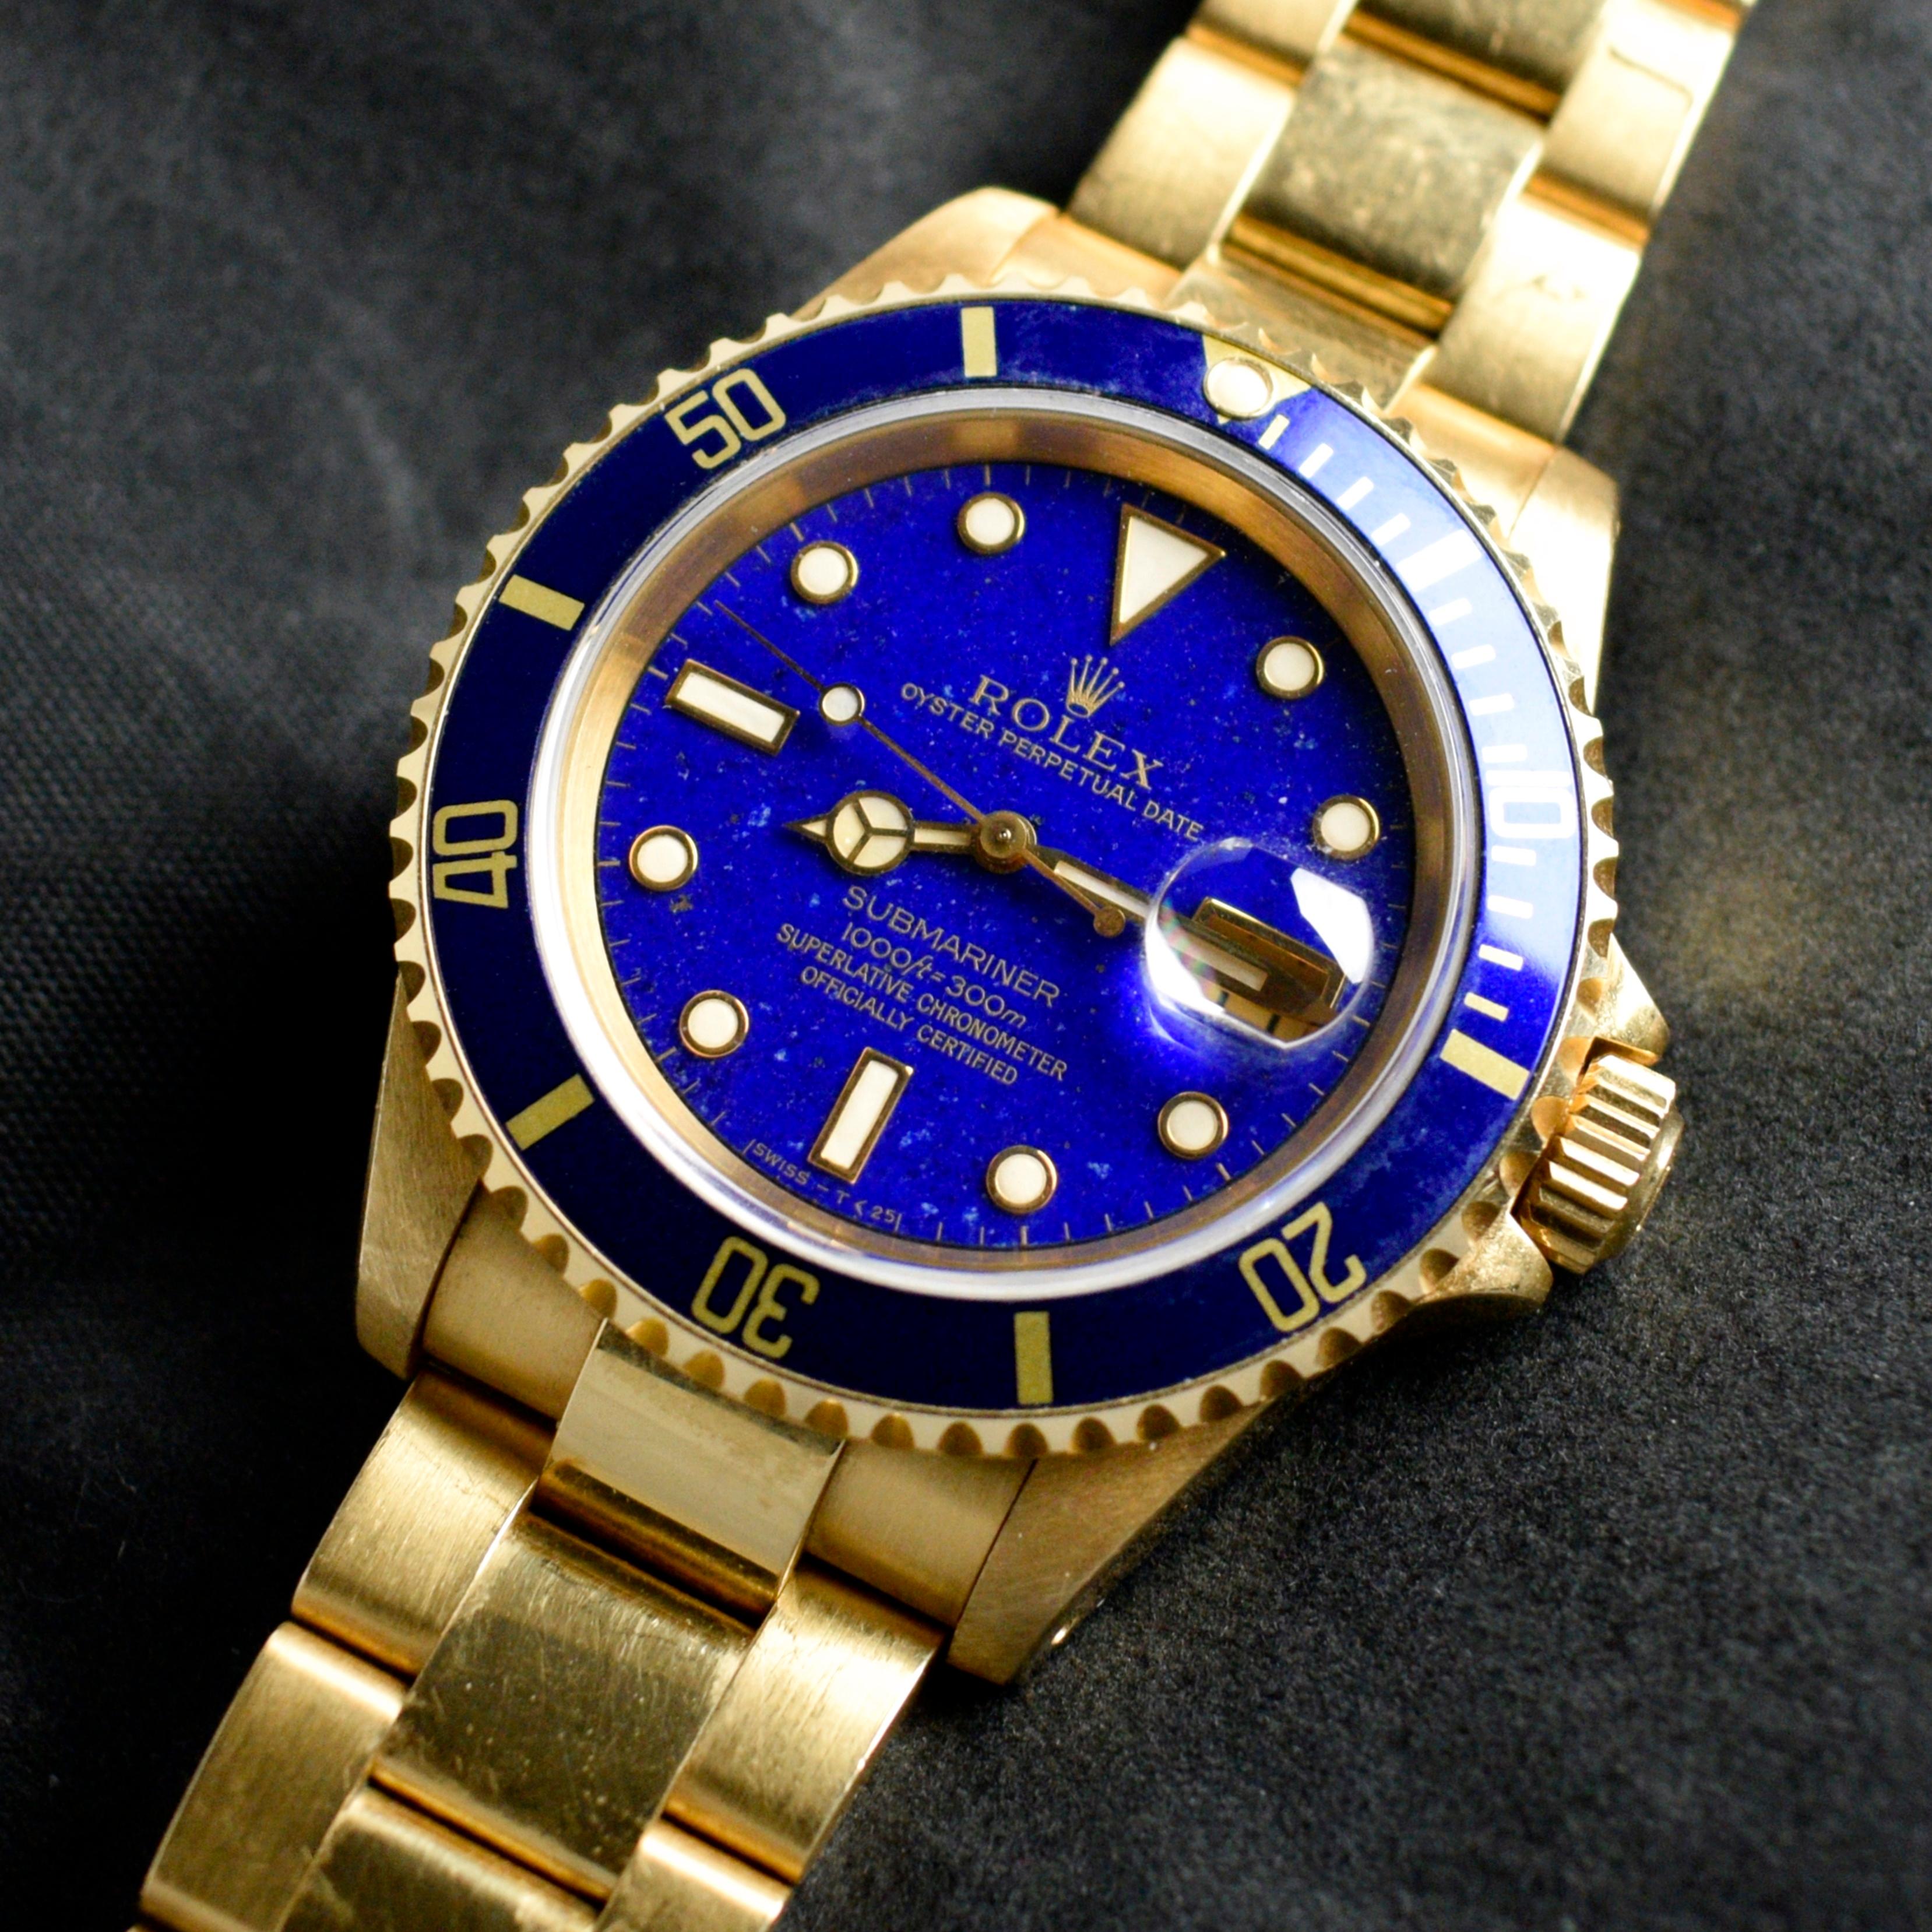 Brand: Vintage Rolex
Model: 16618
Year: 1990
Serial number: E8xxxxx
Reference: OT1673

Over its lifespan, numerous types of dials and bezels colours were introduced, including black dial, champagne dial, and also diamond or sapphire-set indexes. But